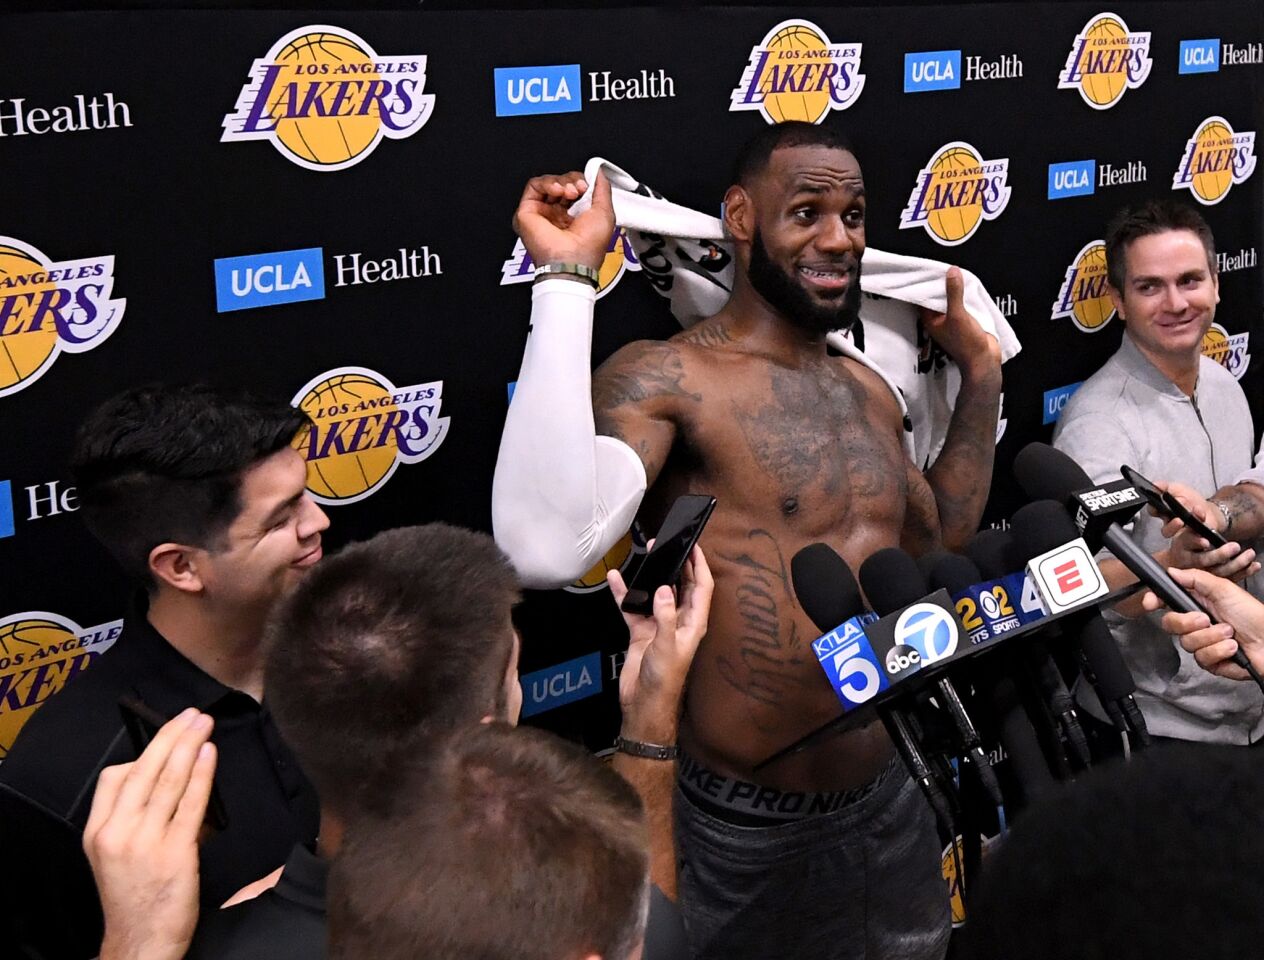 EL SEGUNDO, CA - SEPTEMBER 25: LeBron James of the Los Angeles Lakers speaks to the press after a Los Angeles Lakers practice session at the UCLA Health Training Center on September 25, 2018 in El Segundo, California. (Photo by Harry How/Getty Images) ** OUTS - ELSENT, FPG, CM - OUTS * NM, PH, VA if sourced by CT, LA or MoD **